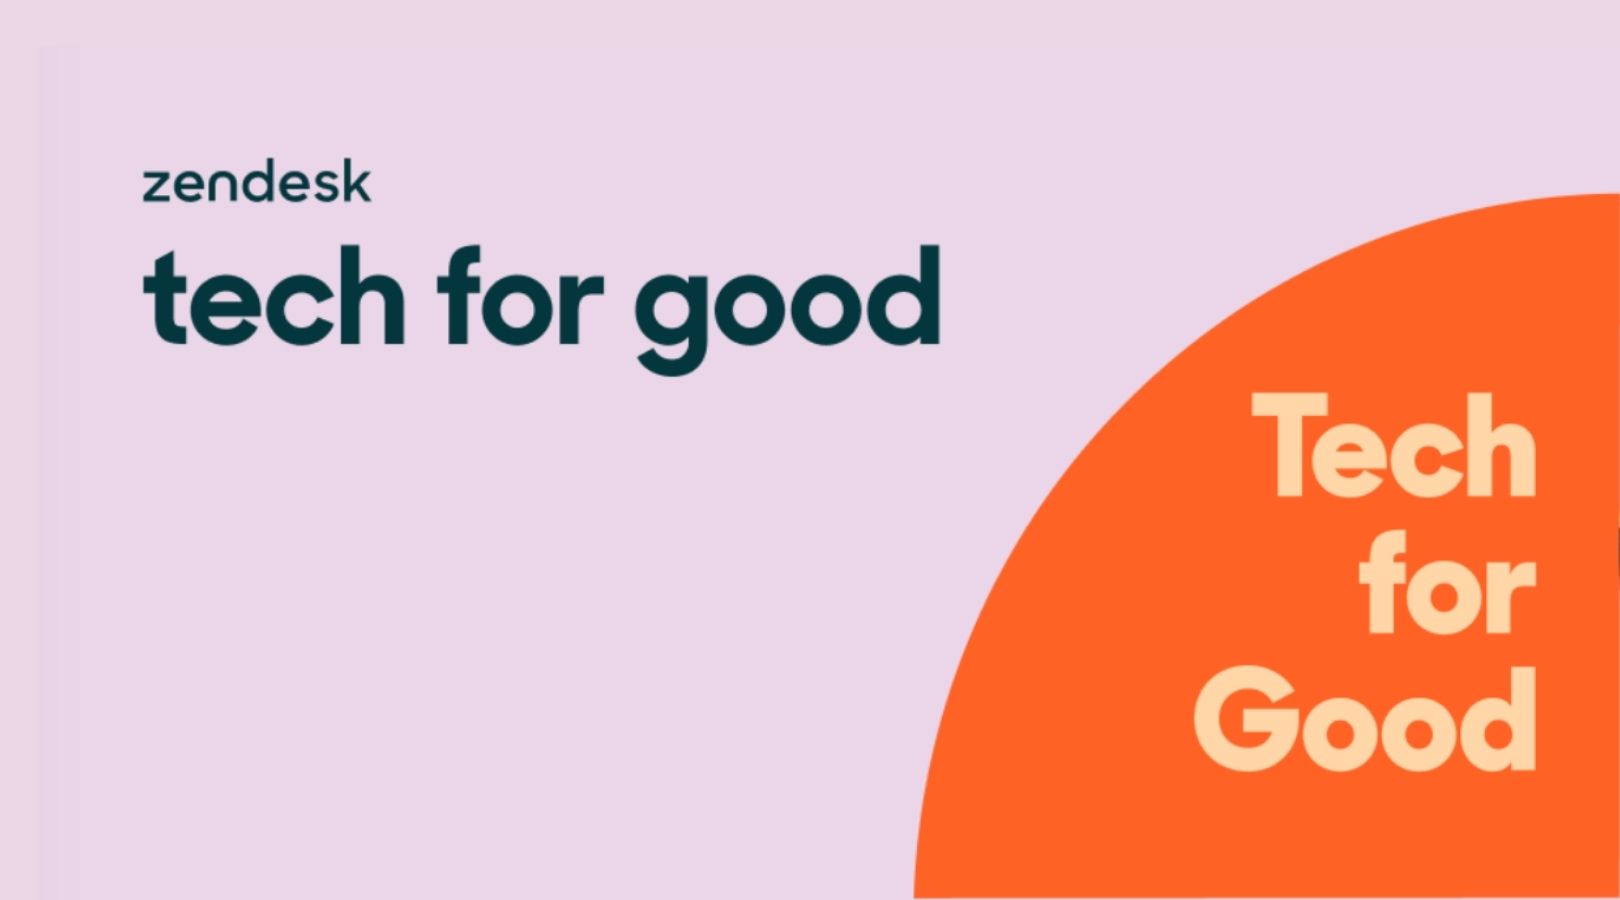 Zendesk Tech for Good Impact Awards 2022 for Global Nonprofit Organizations (Up to $500K in funding)